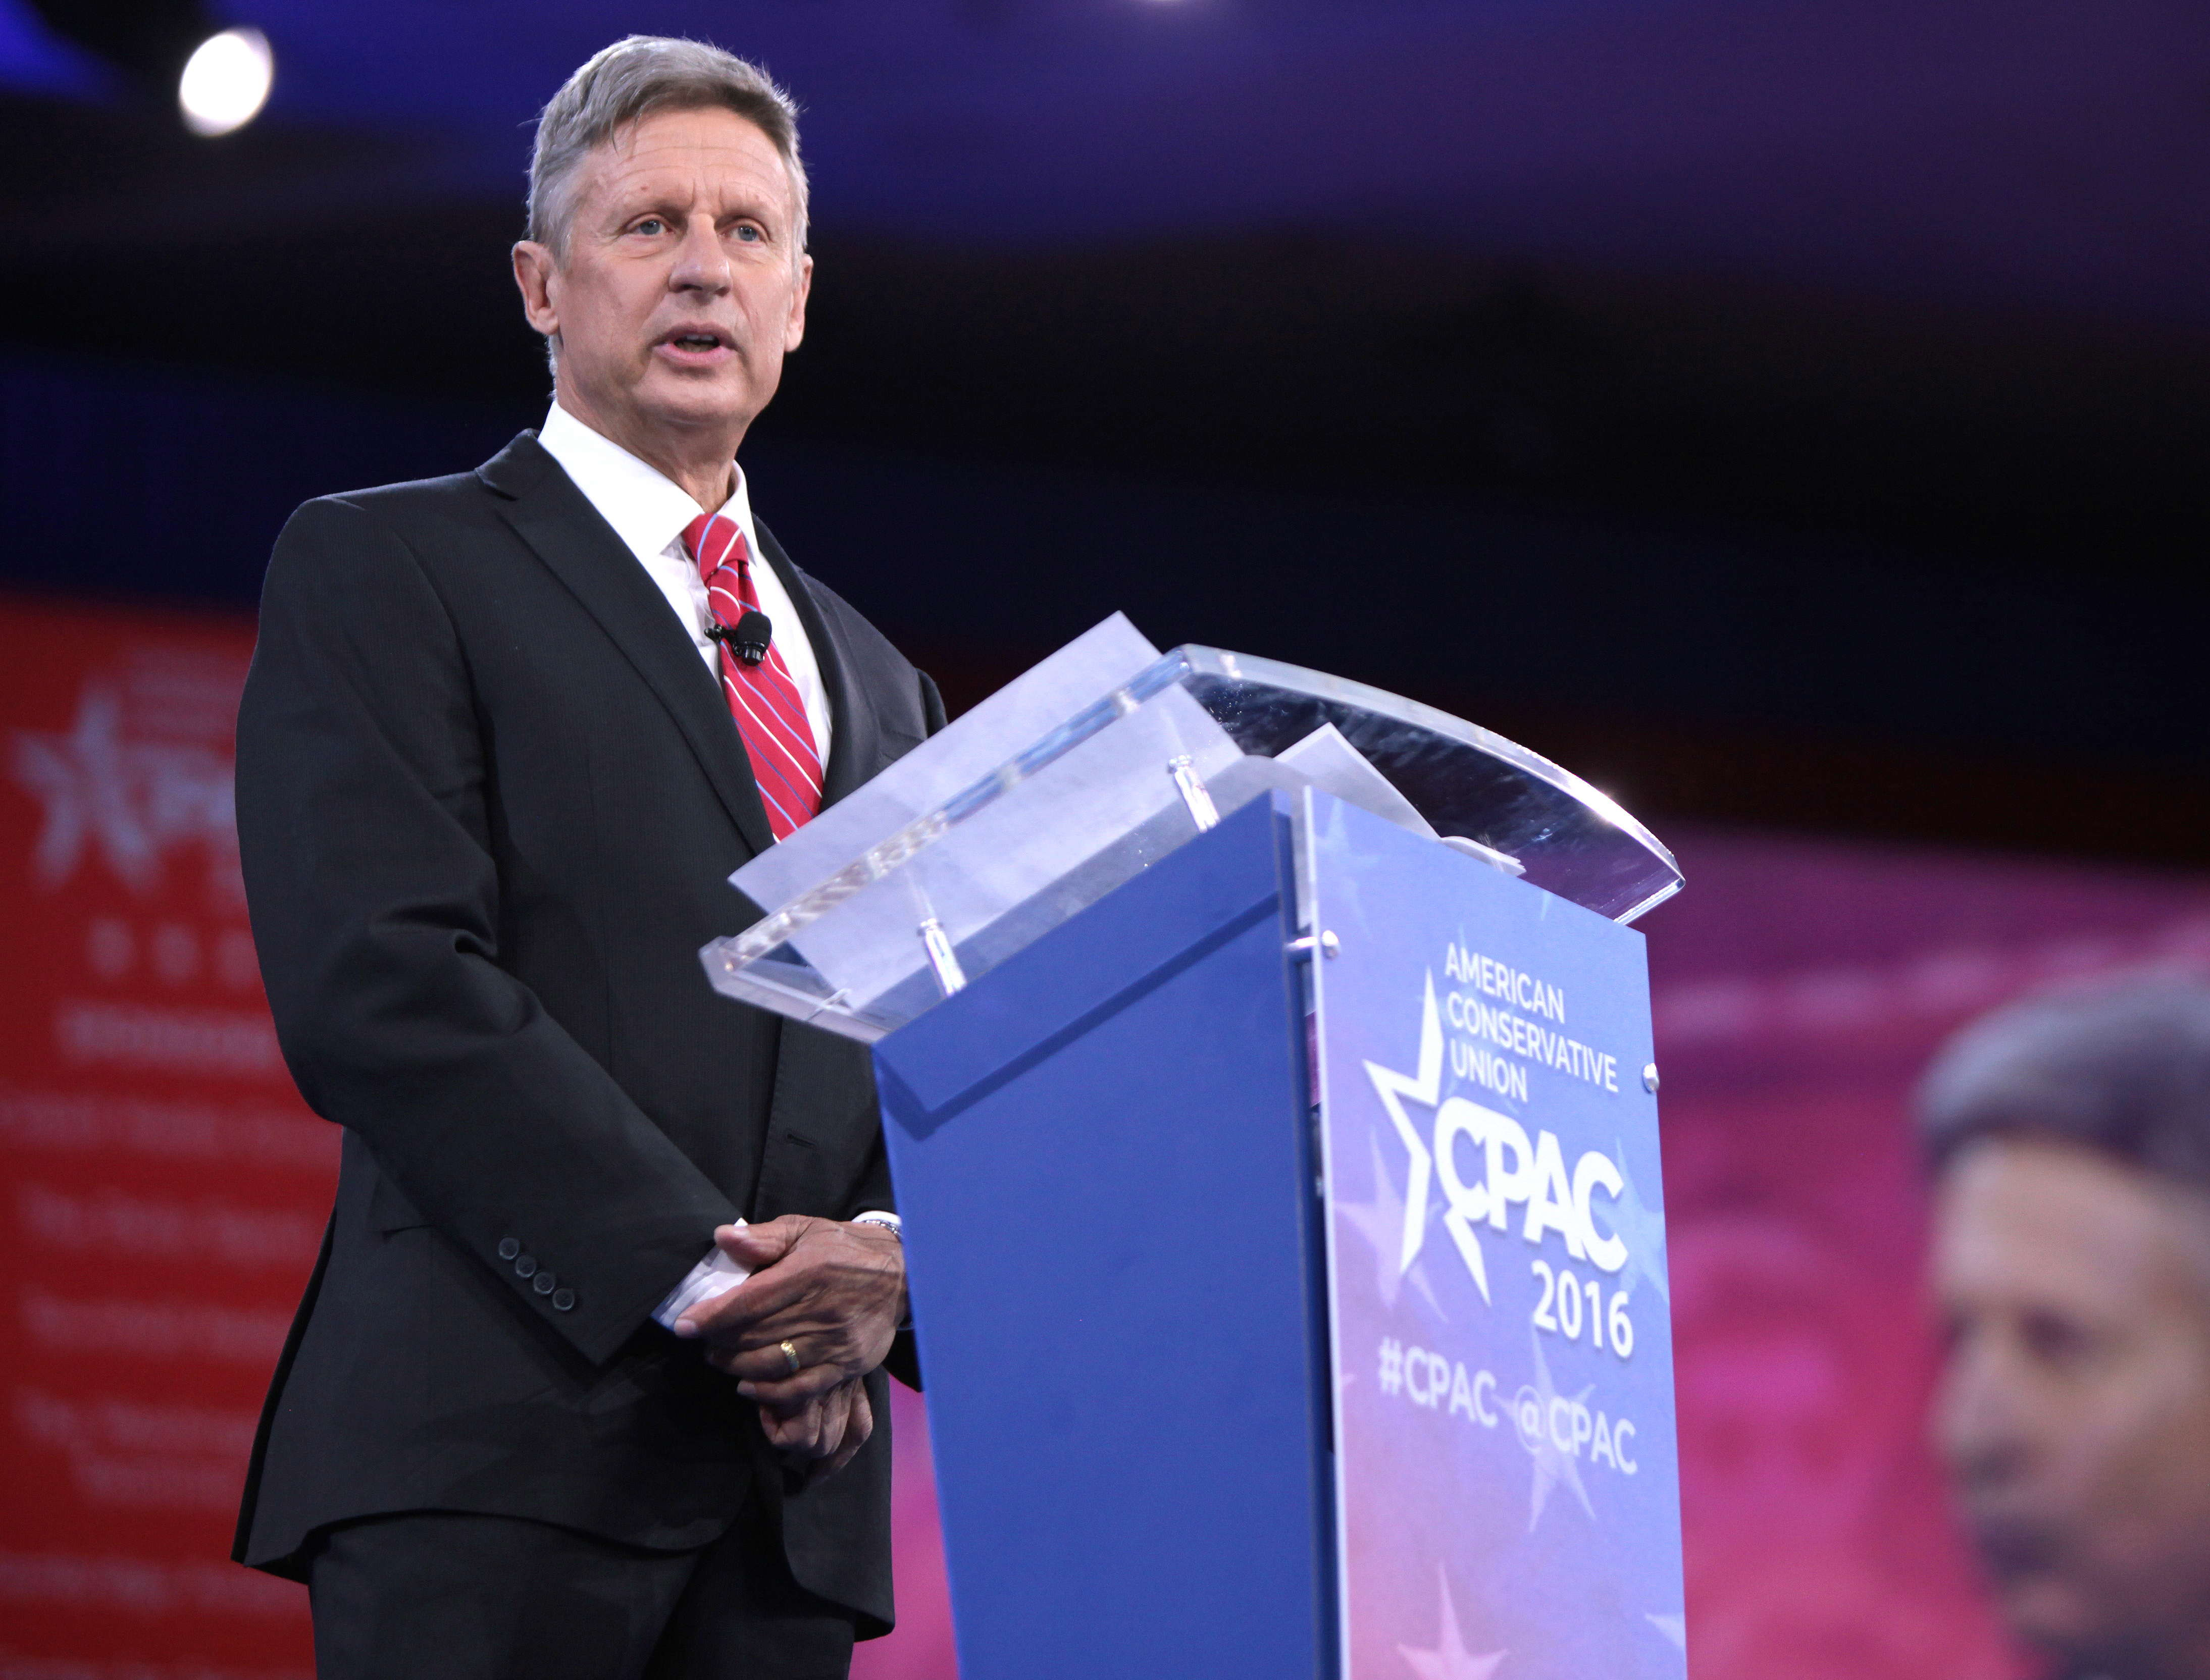 Going Gary: Gary Johnson speaking at the 2016 Conservative Political Action Conference in Washington, D.C. Johnson is a third-party Libertarian candidate. He’s the leading third-party candidate, with seven percent of the nation’s support according to the New York Times. © Photo Courtesy of Gage Skidmore